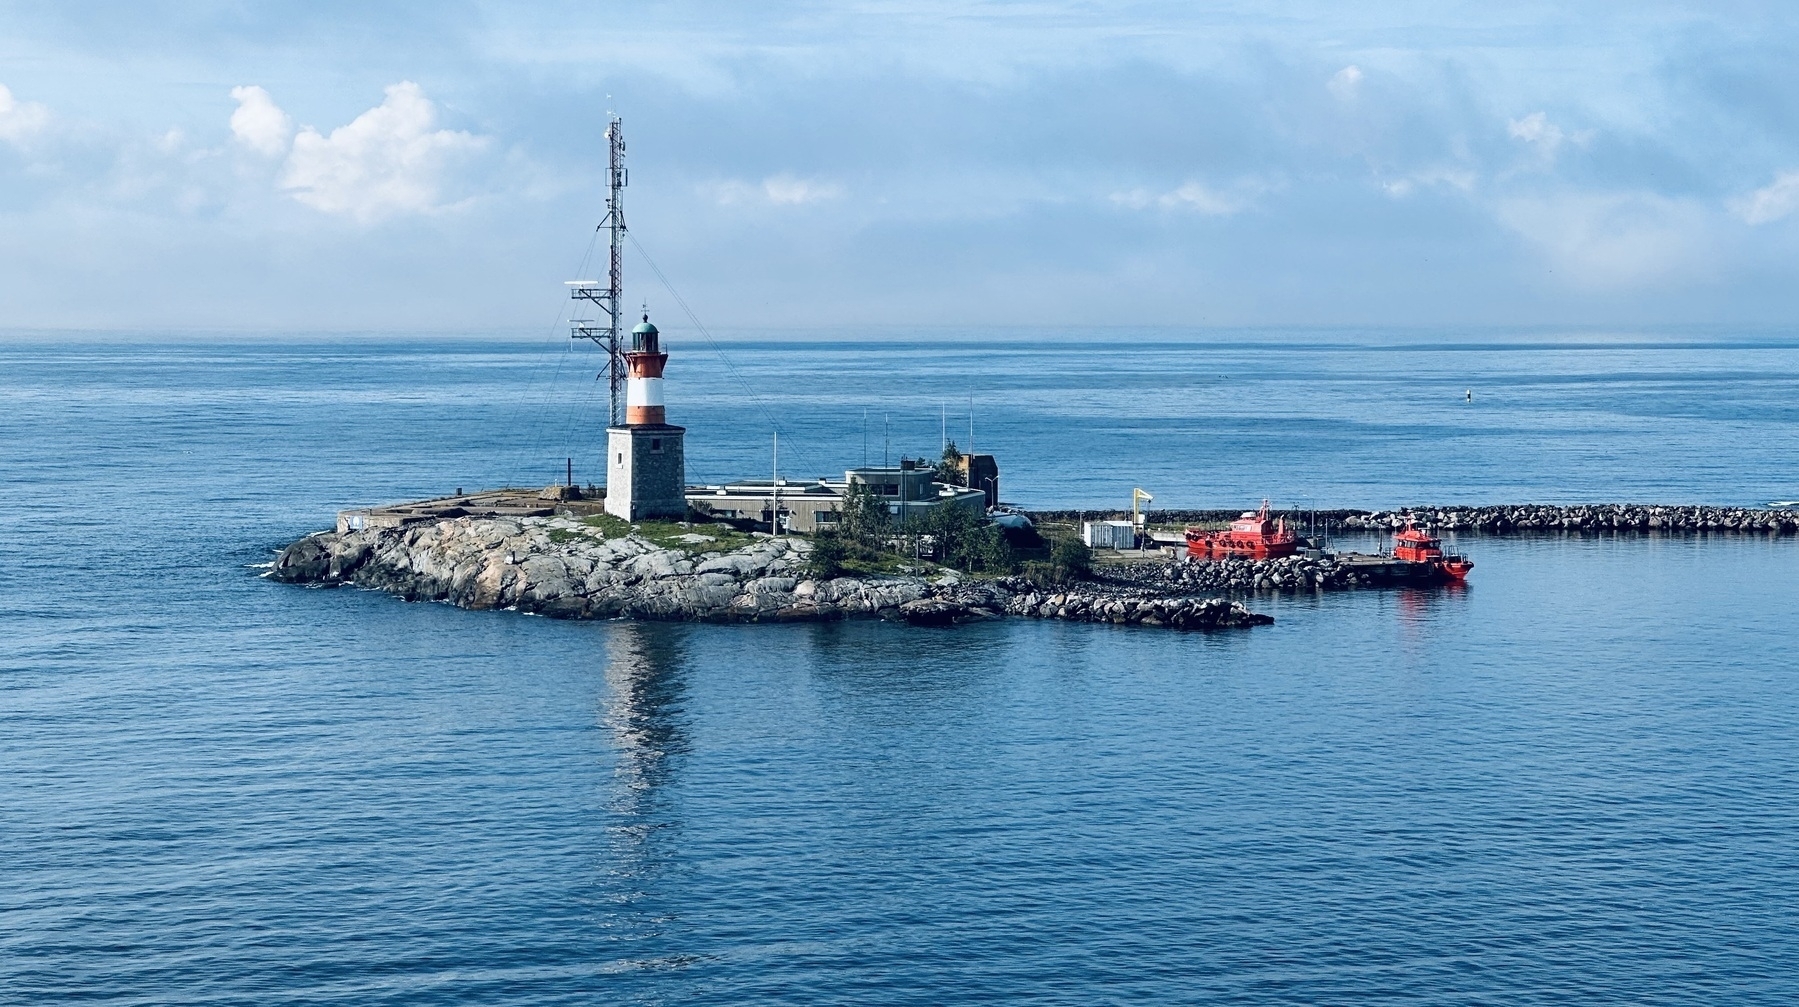 A small lighthouse and harbour on a rocky island.